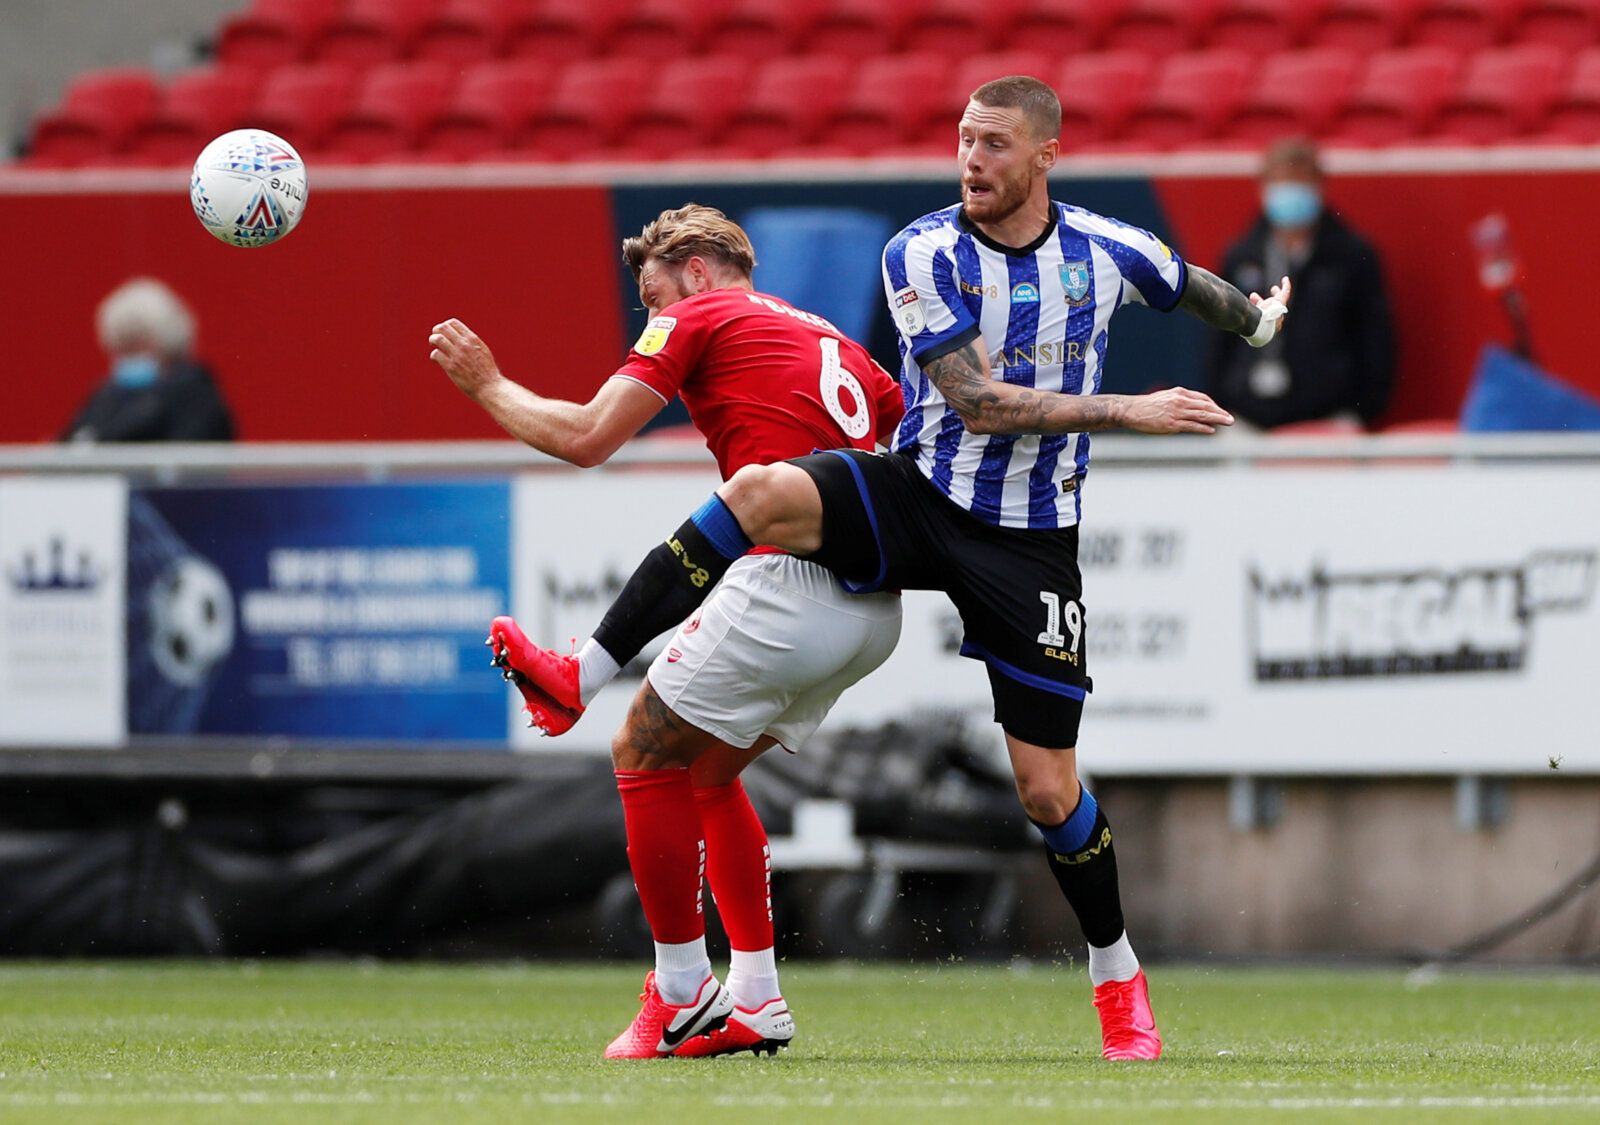 Soccer Football - Championship - Bristol City v Sheffield Wednesday - Ashton Gate Stadium, Bristol, Britain - June 28, 2020  Bristol City's Nathan Baker in action with Sheffield Wednesday's Connor Wickham, as play resumes behind closed doors following the outbreak of the coronavirus disease (COVID-19)  Action Images/Paul Childs  EDITORIAL USE ONLY. No use with unauthorized audio, video, data, fixture lists, club/league logos or 